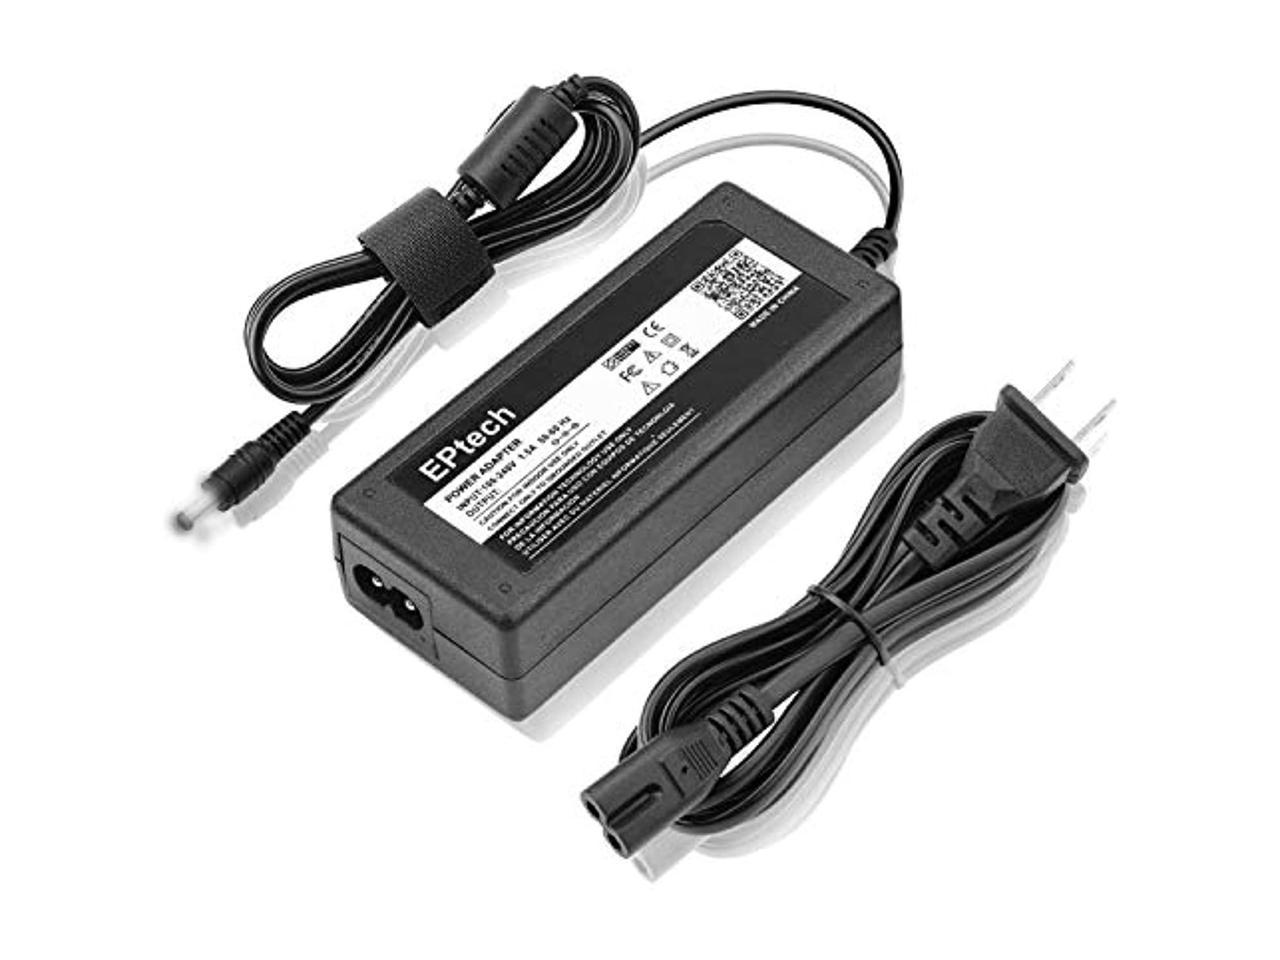 AC Adapter for Shark Euro-Pro SV746 Cordless 14.4V Power Supply Cord Charger PSU 